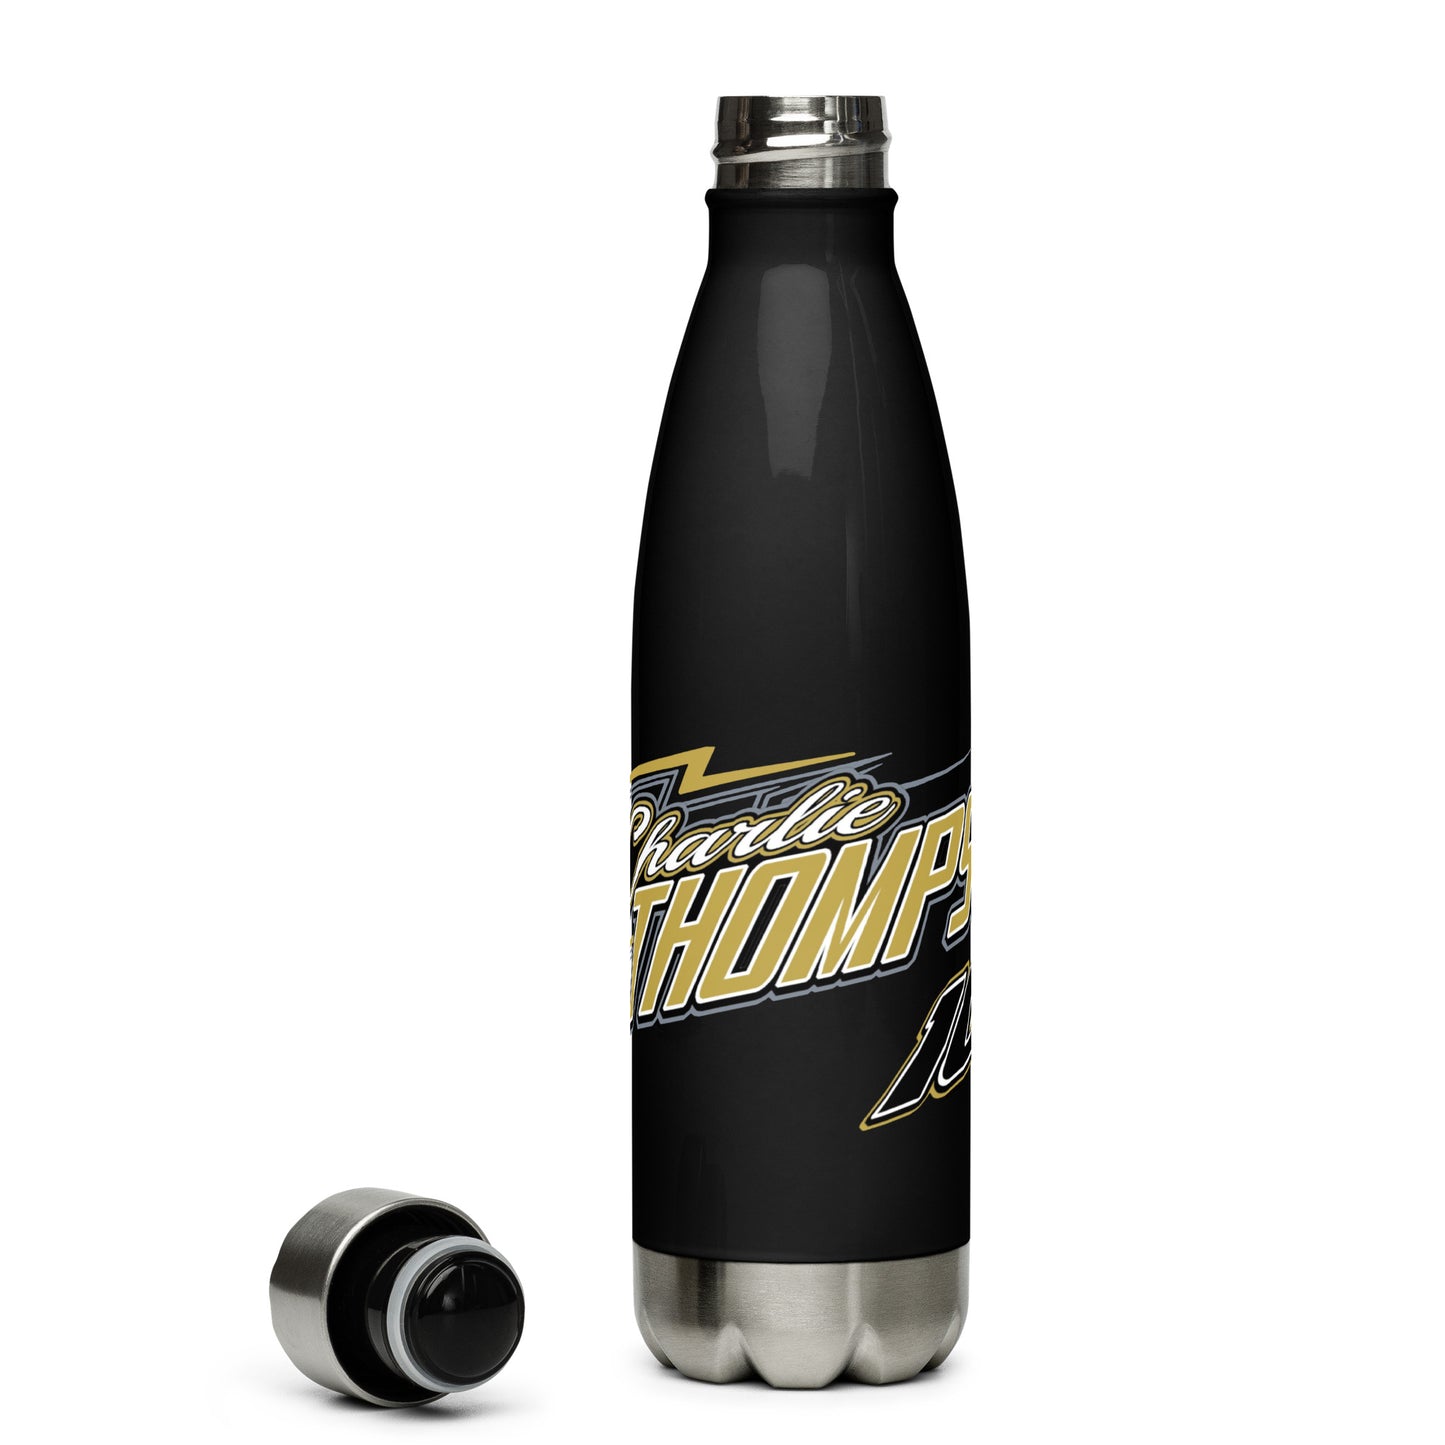 Charlie Thompson Stainless steel water bottle